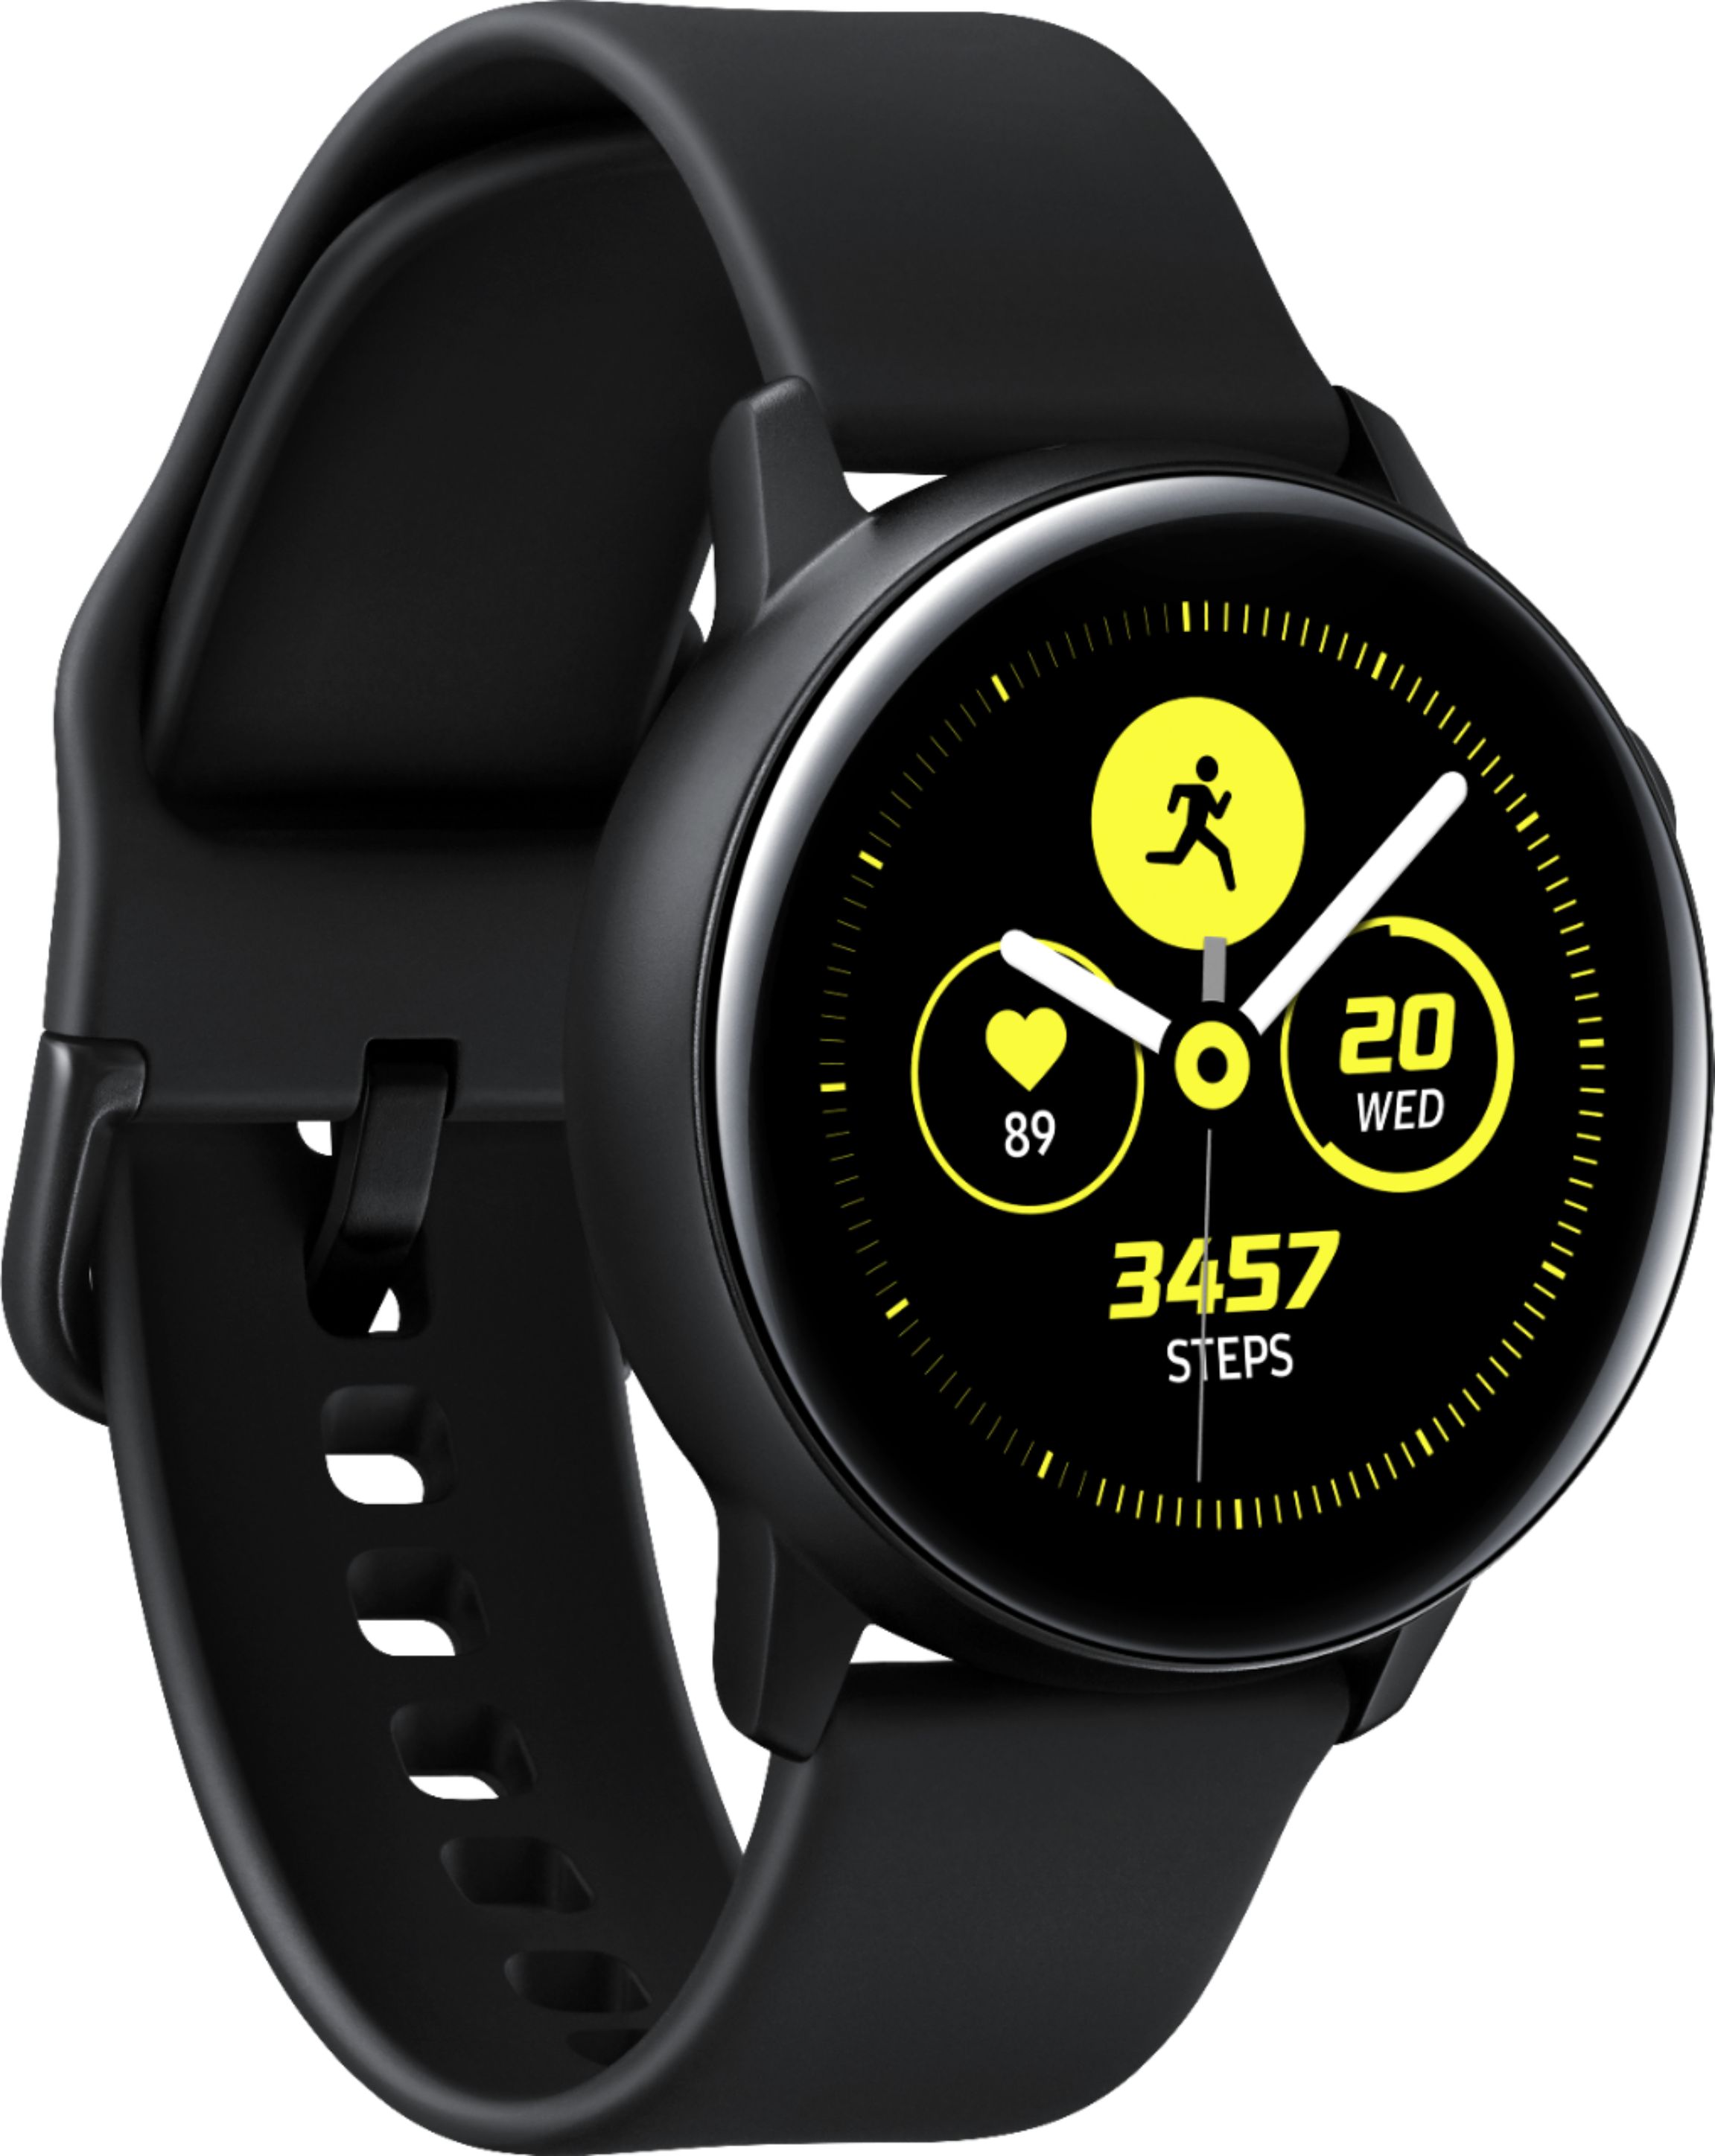 Angle View: Samsung - Geek Squad Certified Refurbished Galaxy Watch Active Smartwatch 40mm Aluminium - Black